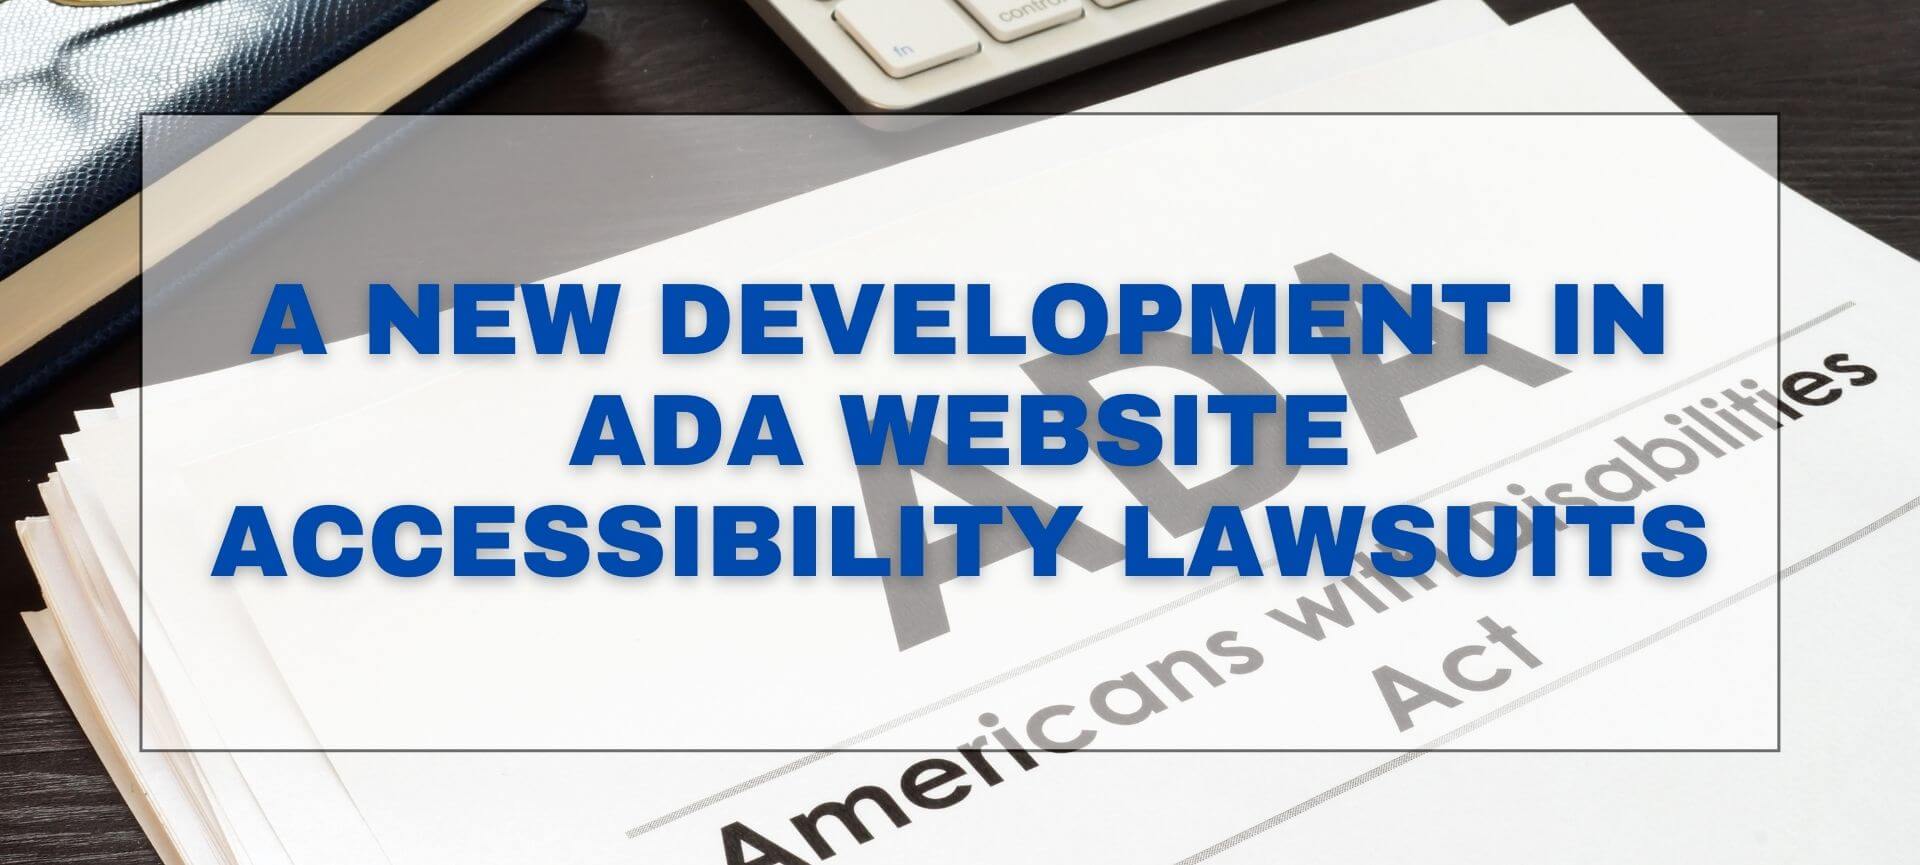 New developments in ADA Website Accessibility lawsuits